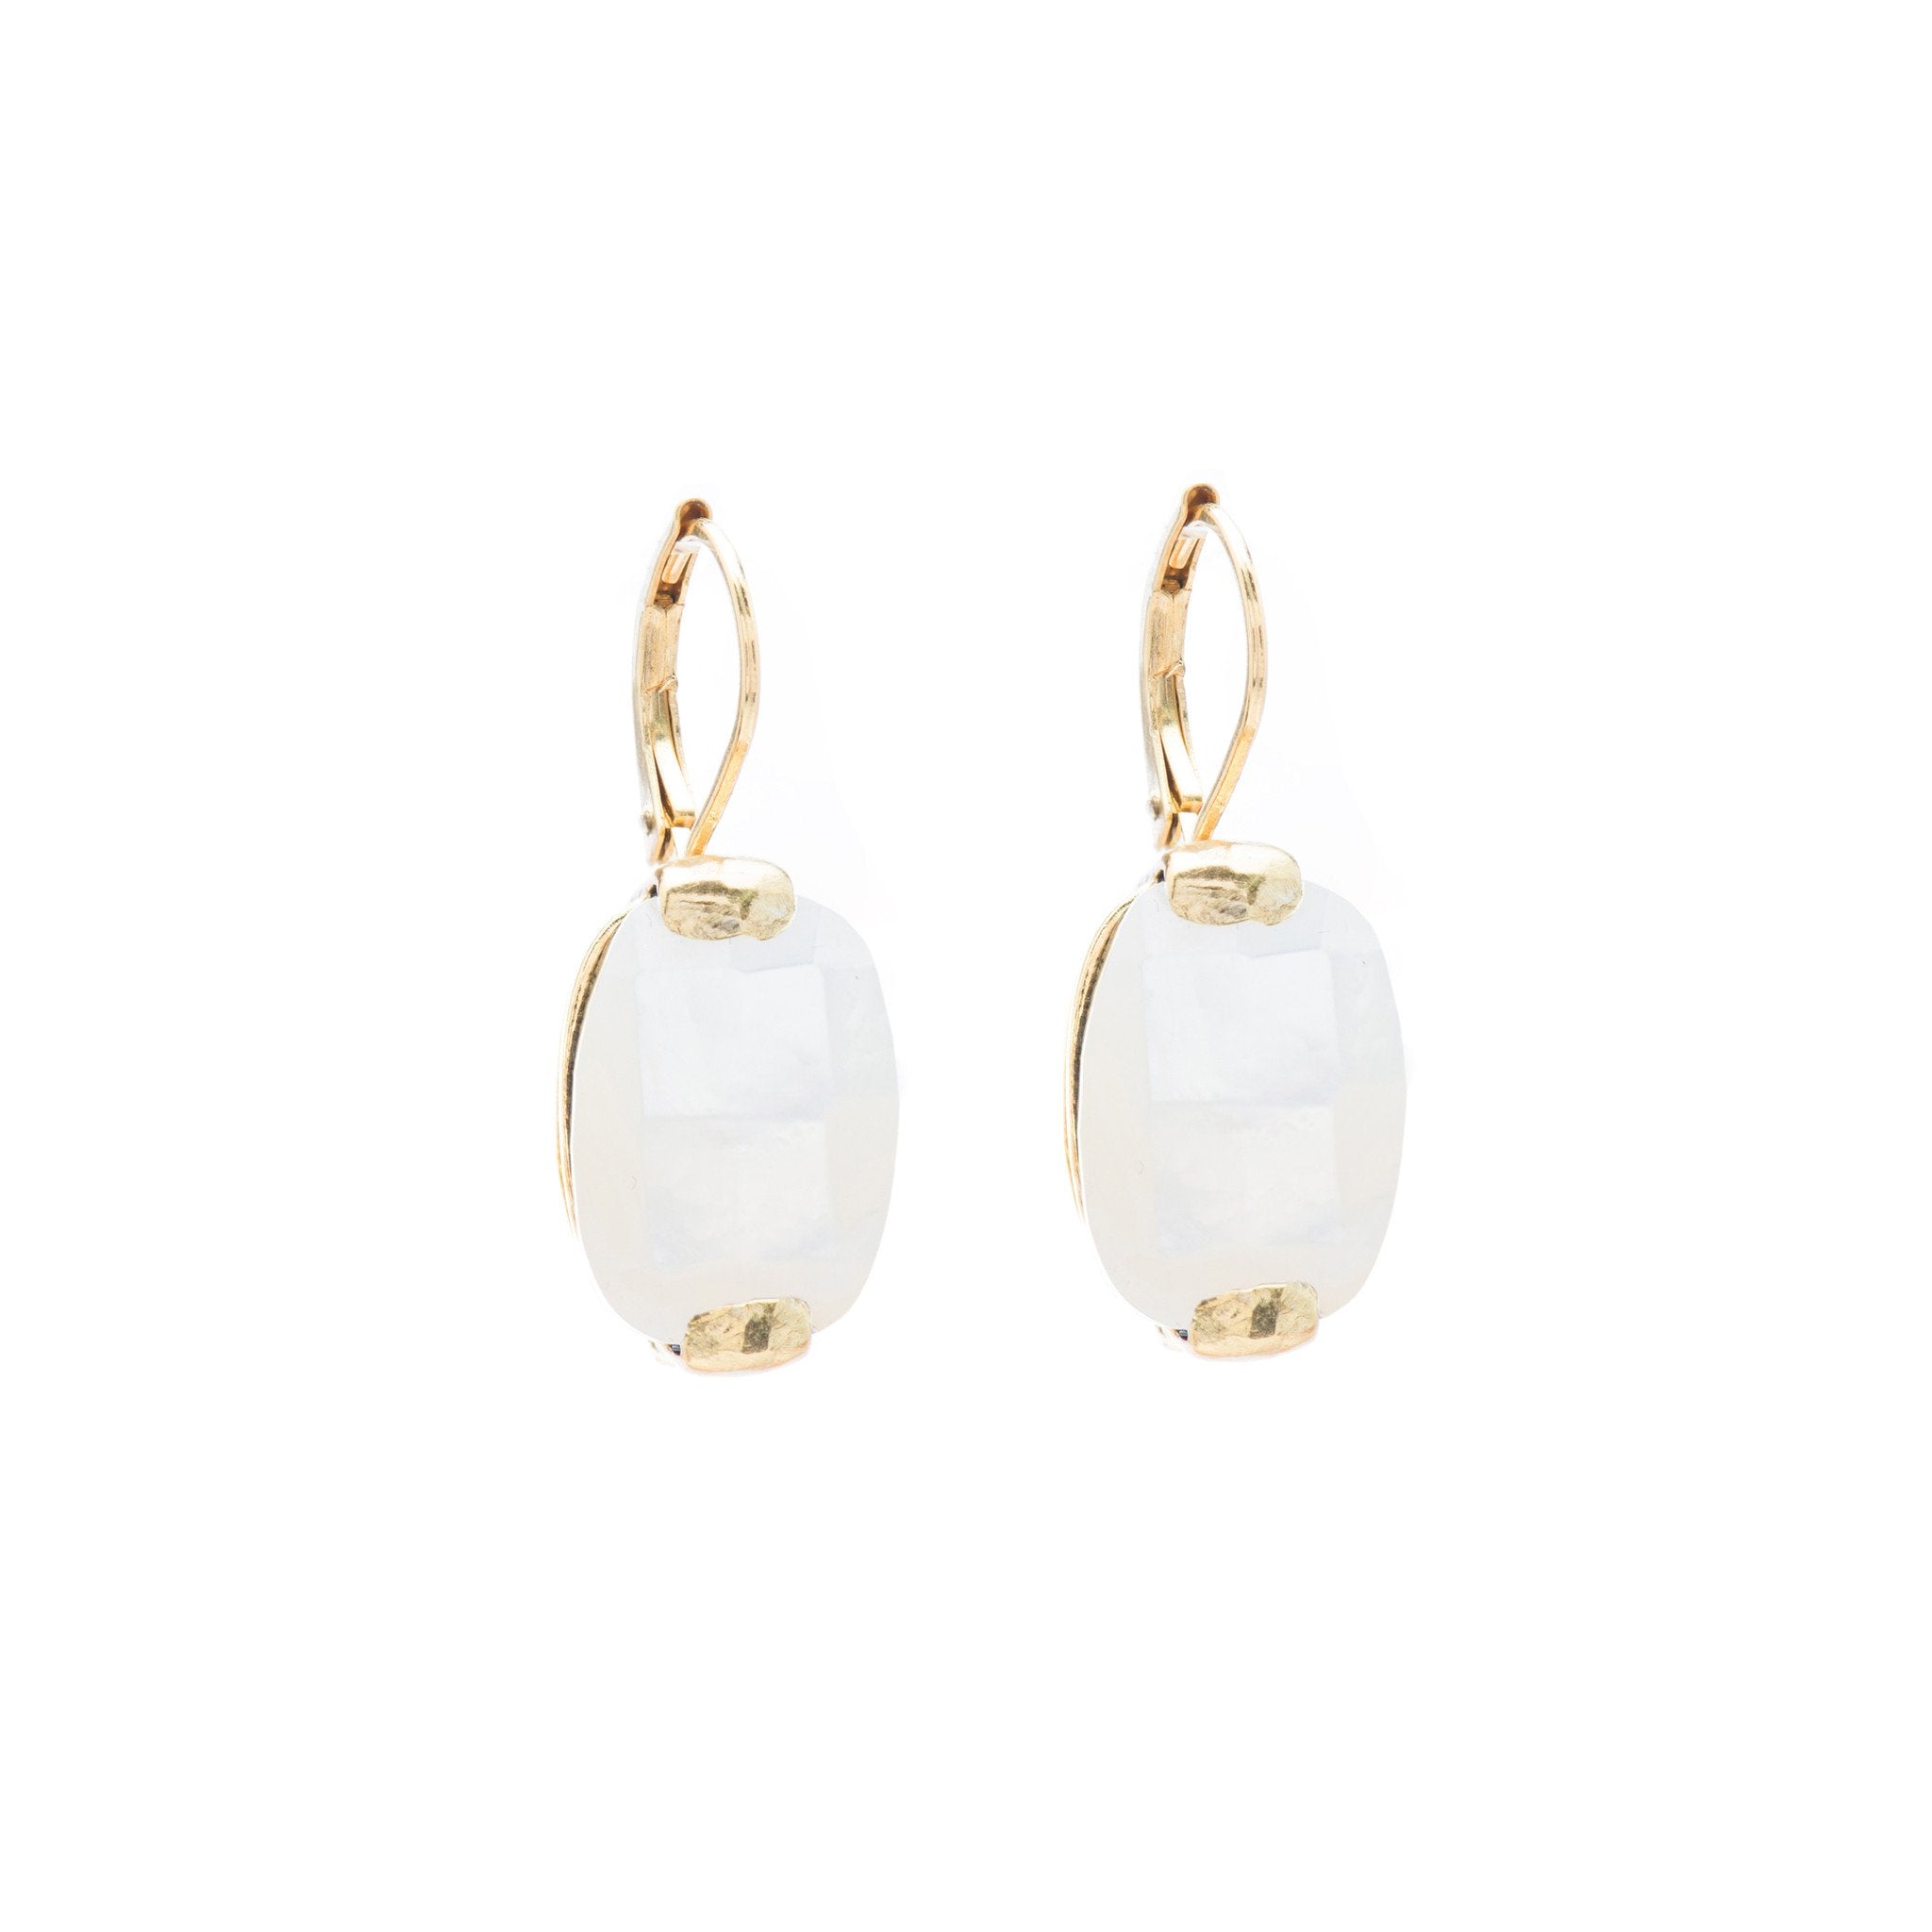 Wouters & Hendrix -  leverback earrings with white mother of pearl